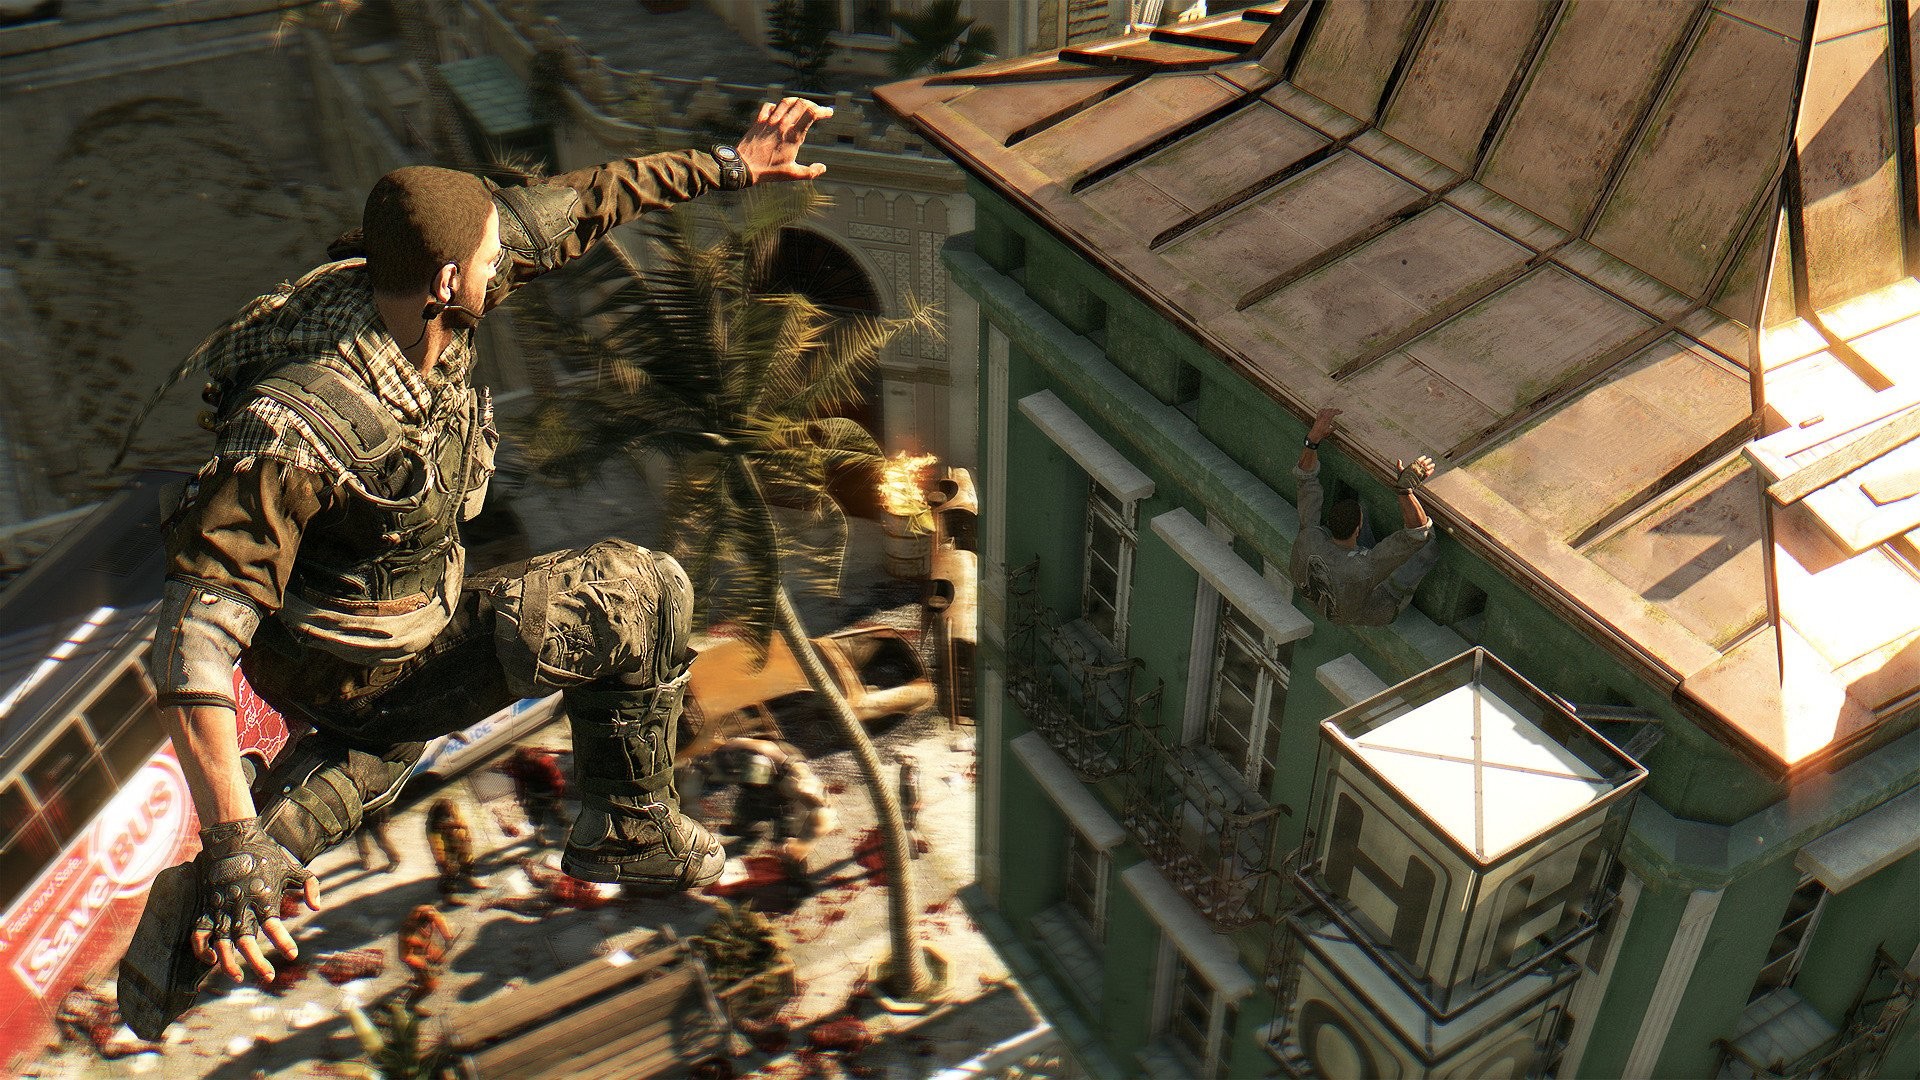 1920x1080 Video Game - Dying Light Wallpaper